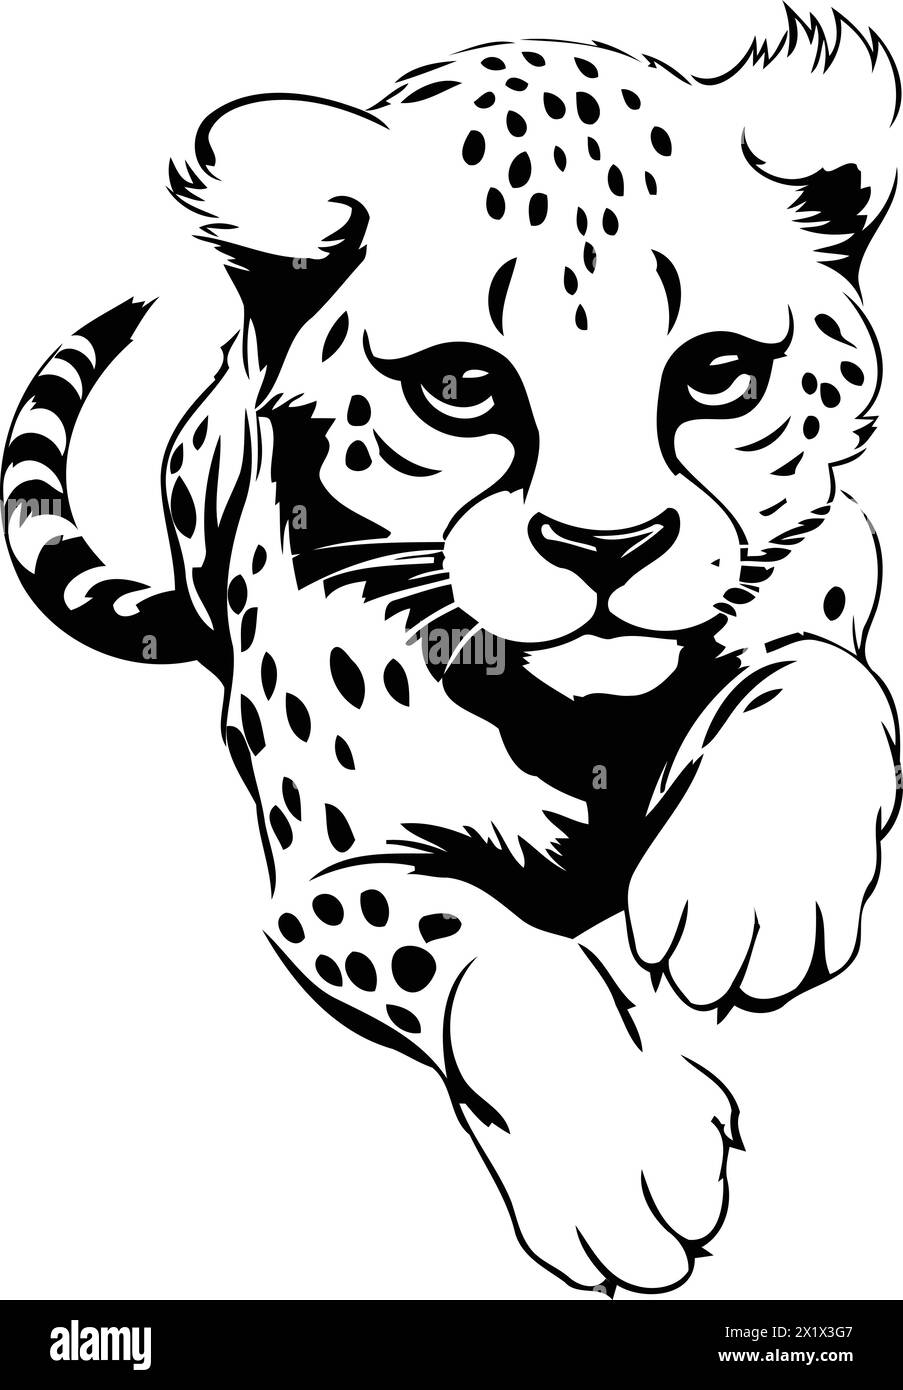 Cheetah running with splashes of ink. Vector illustration. Stock Vector